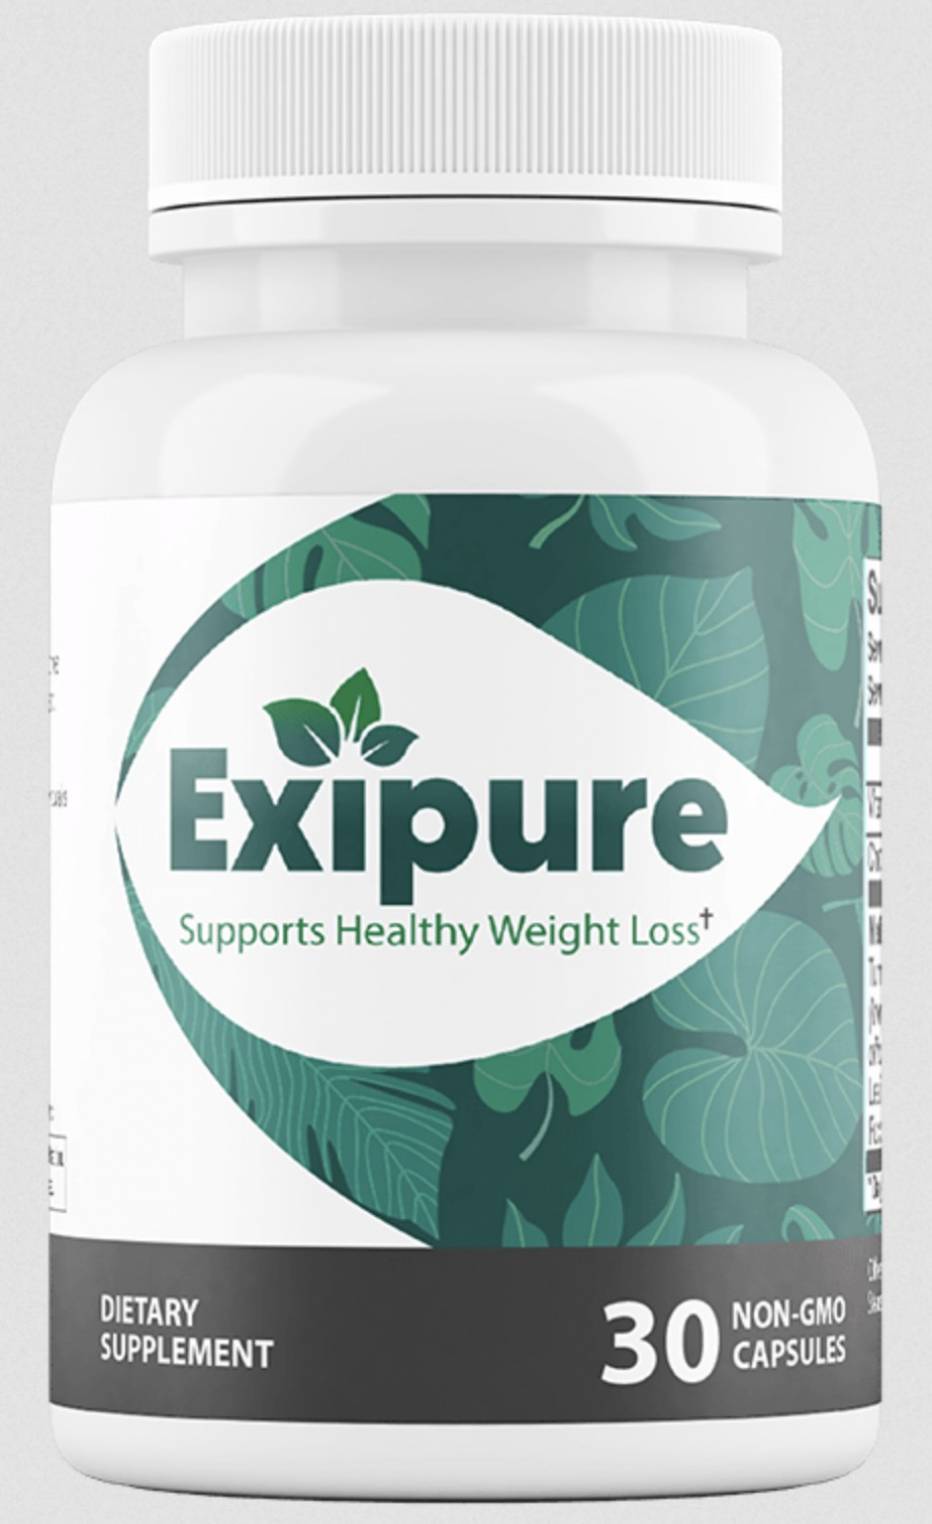 Exipure Back Label Example